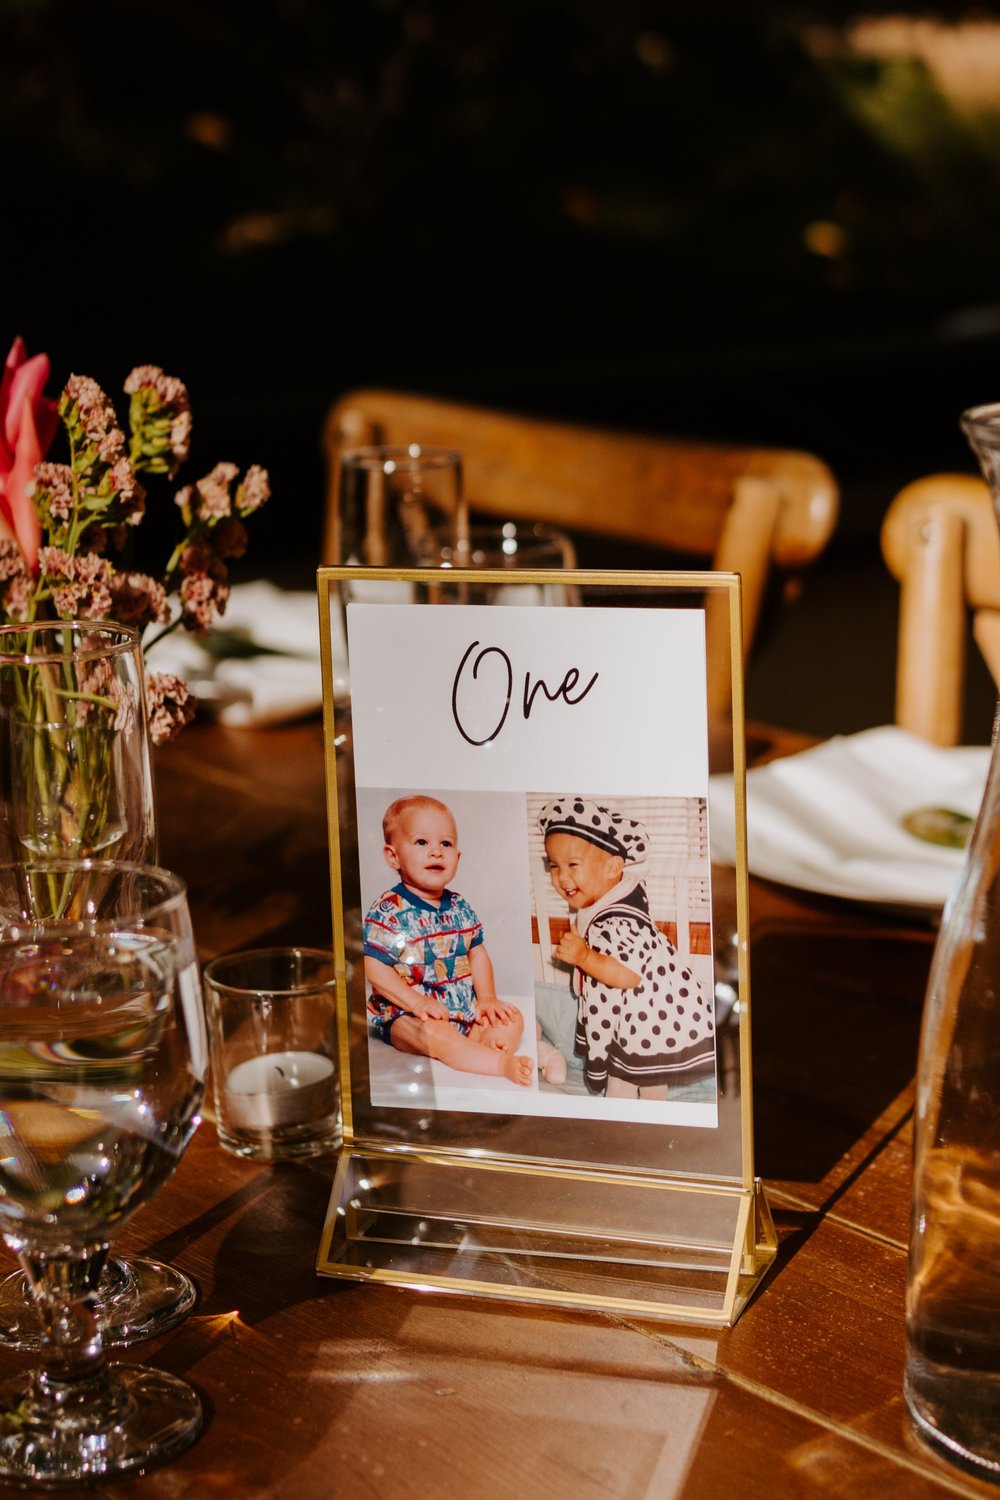 Tropical boho inspired wedding reception, Table numbers with bride and groom photos, Botanica Oceanside wedding reception, San Diego wedding venue, photo by TIda Svy, San Diego wedding photographer